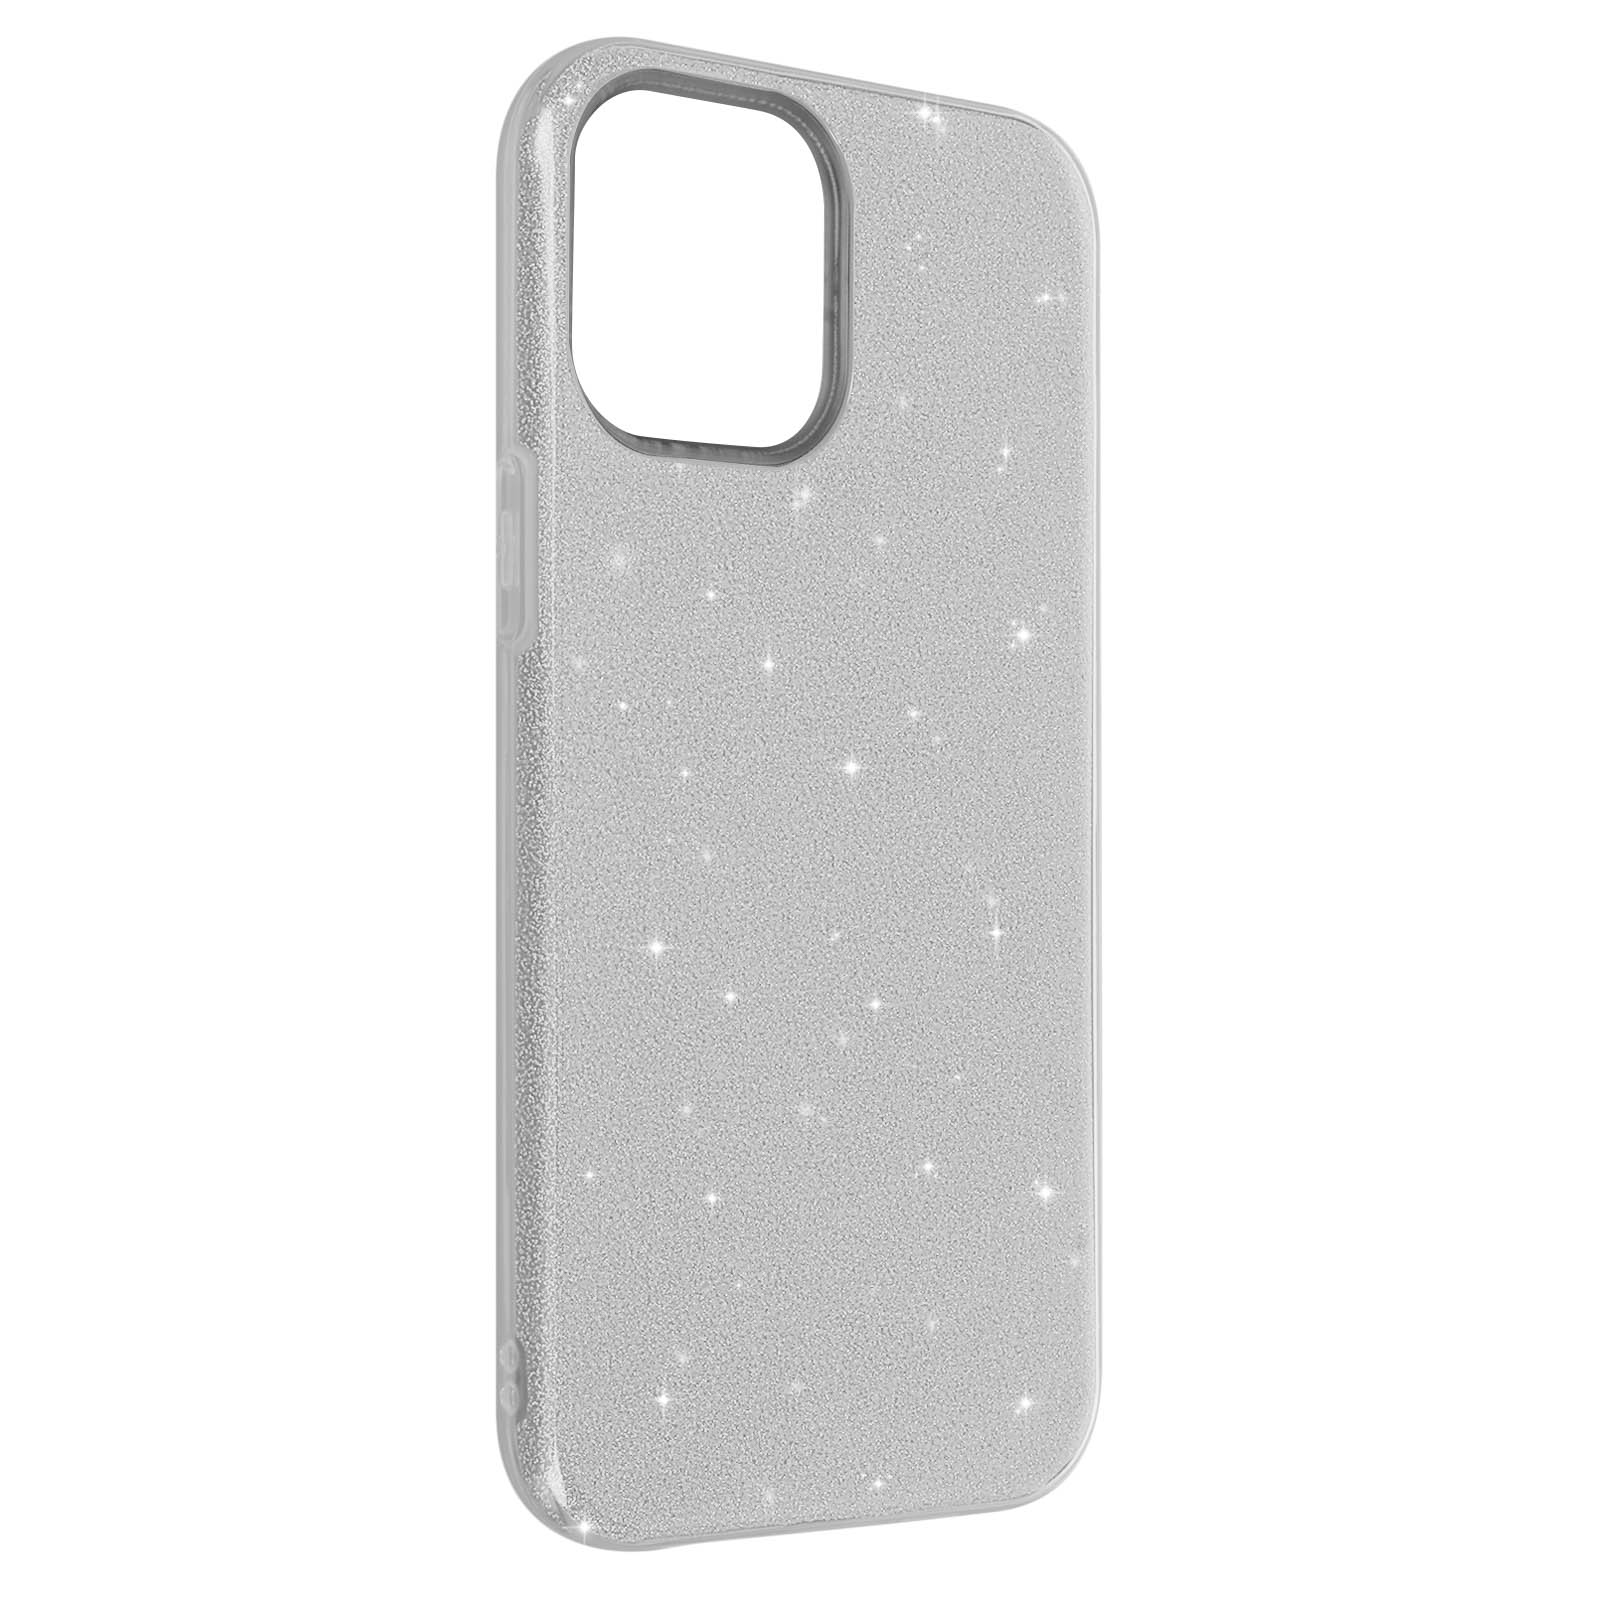 Apple, Papay AVIZAR Pro, Backcover, iPhone Silber Series, 12